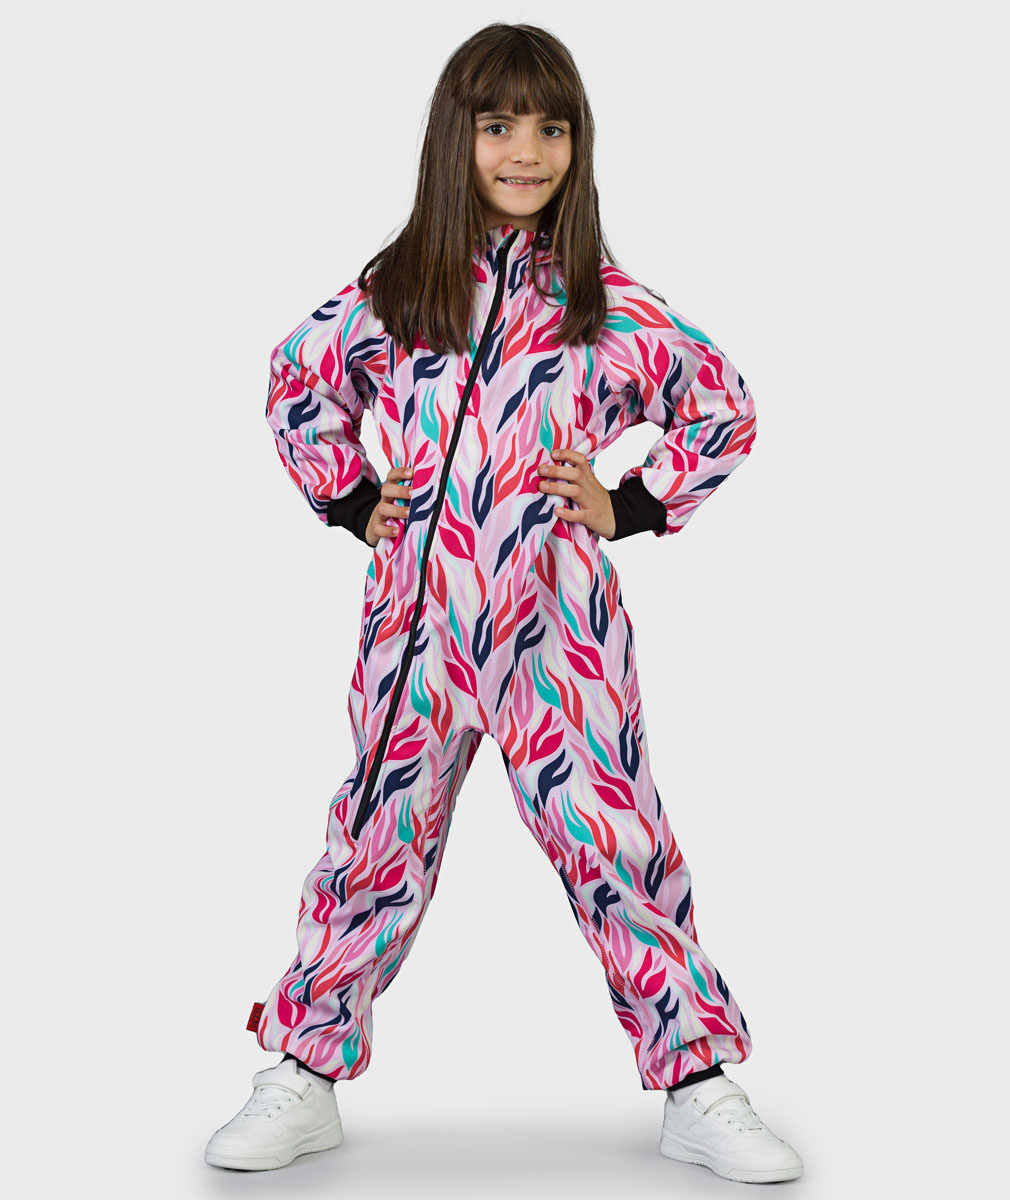 Waterproof Softshell Overall Comfy Colorful Fire Jumpsuit von iELM